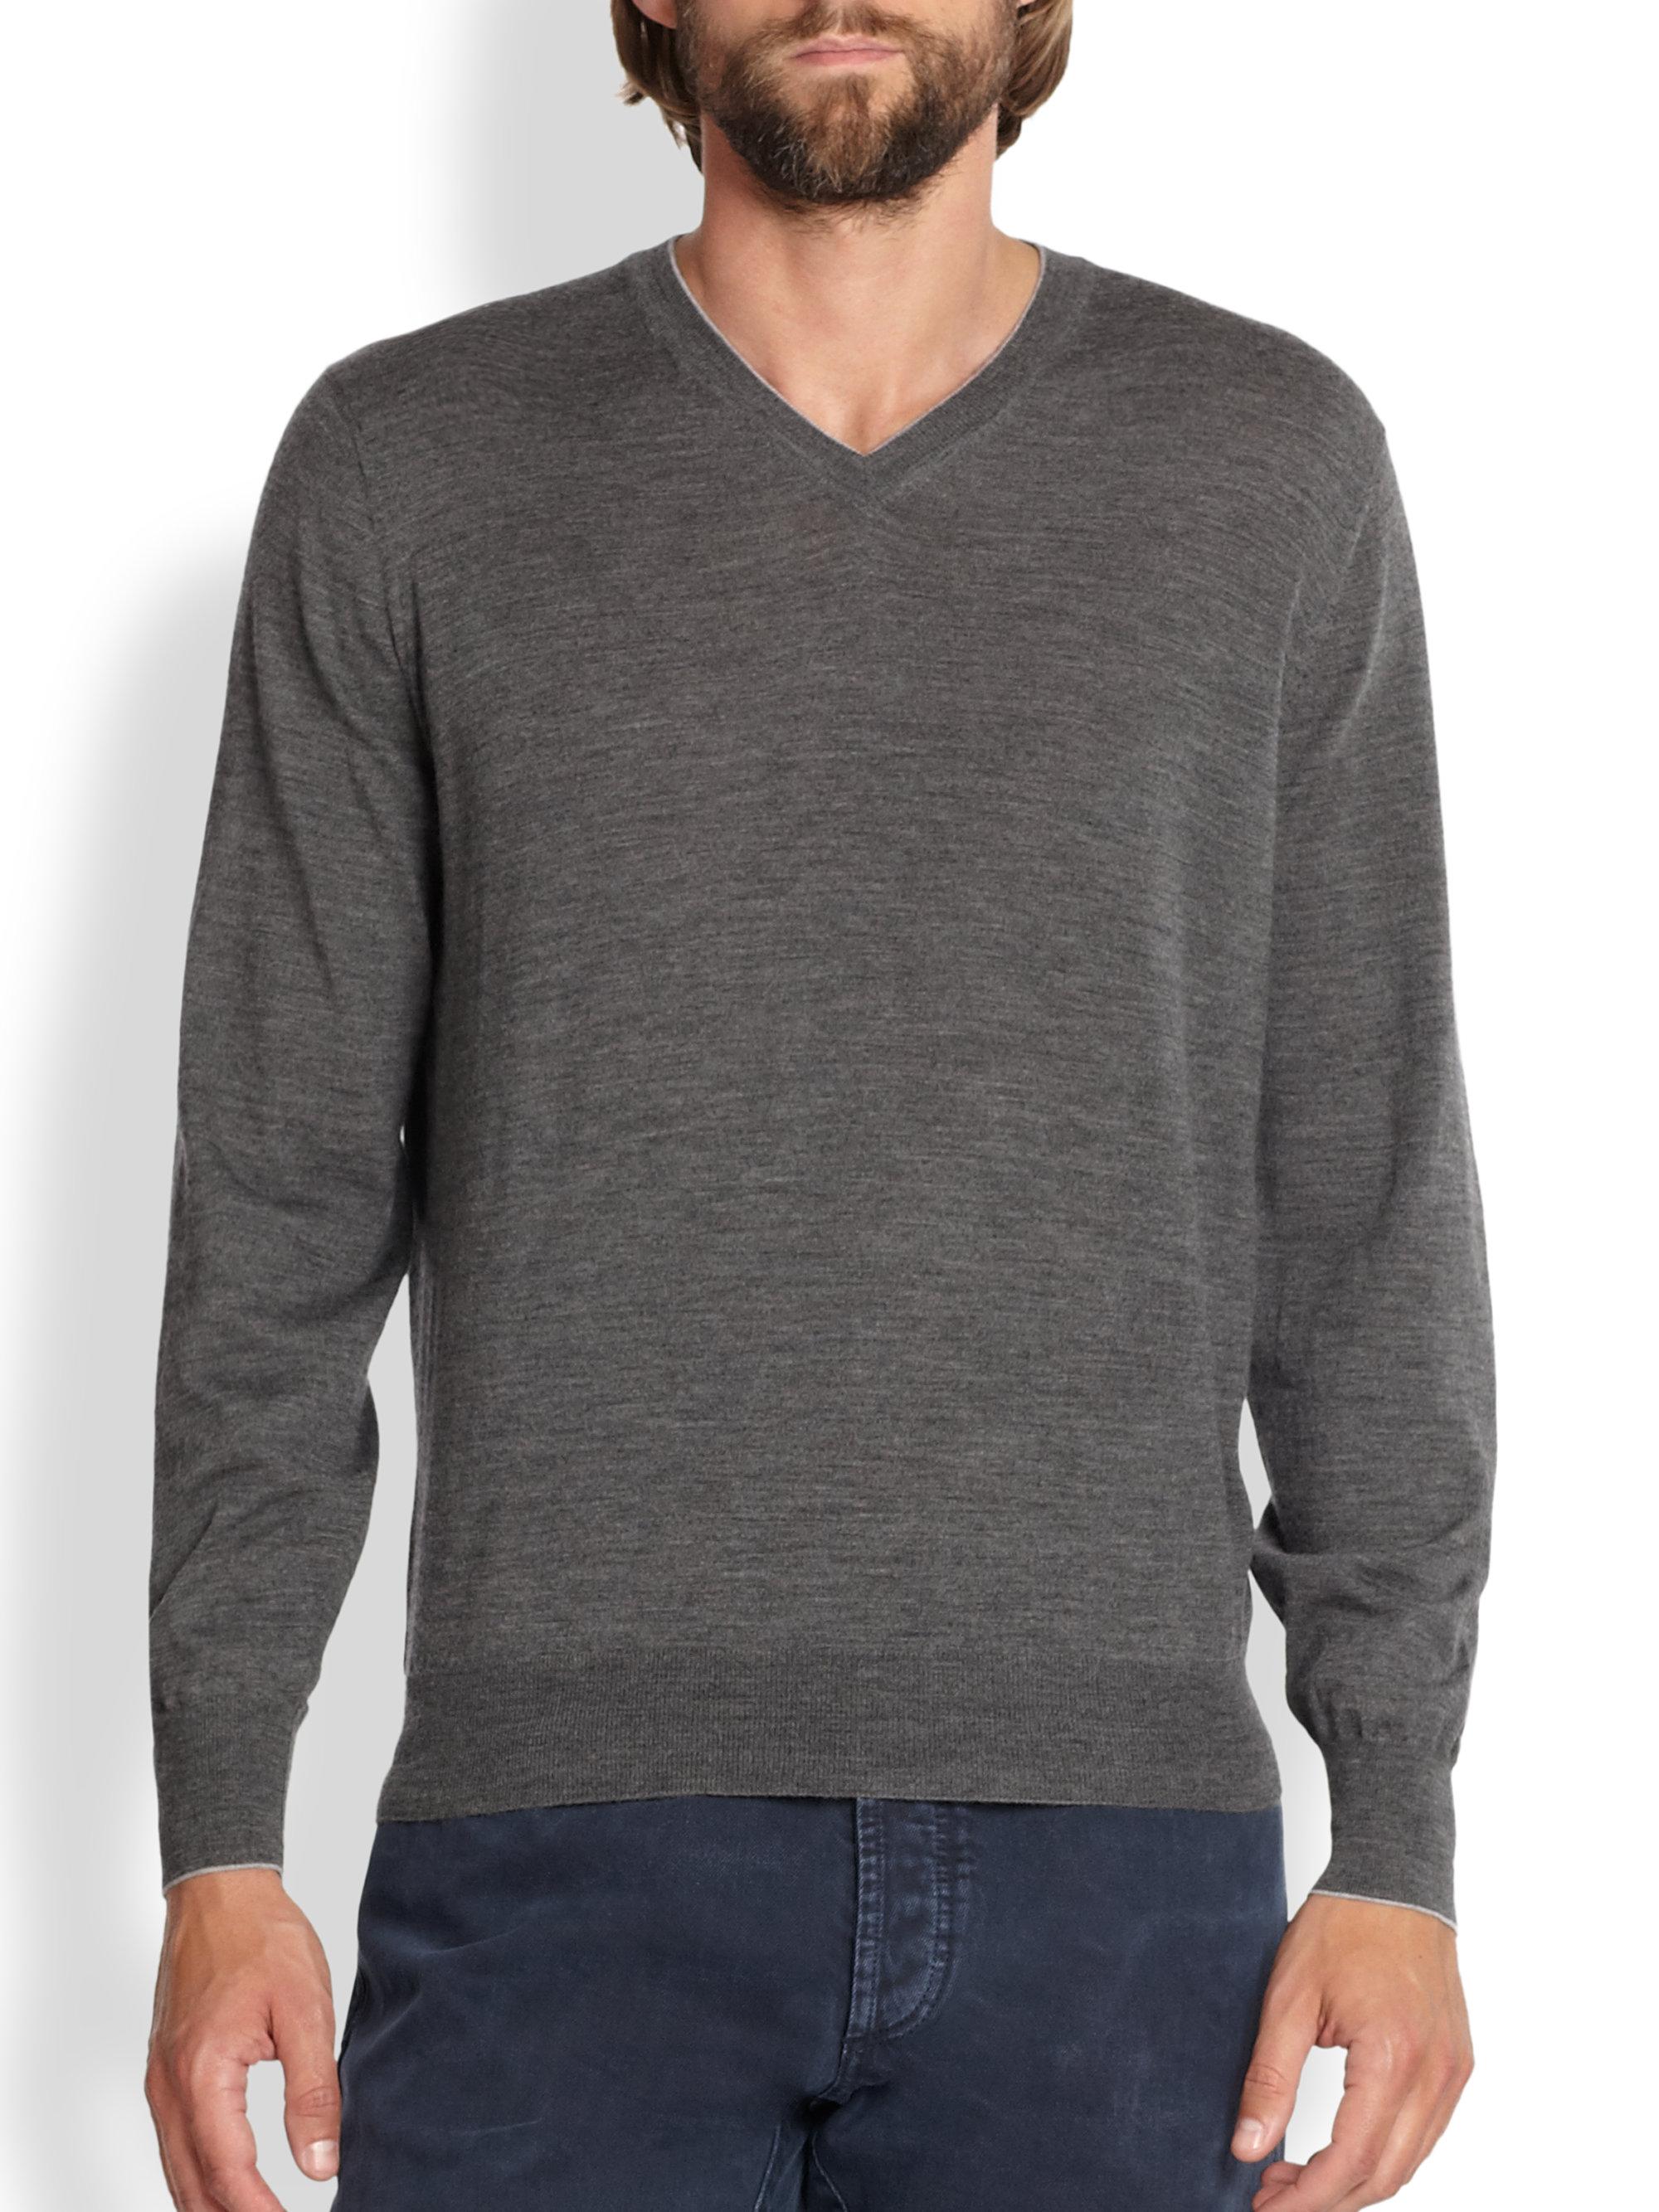 Lyst - Brunello Cucinelli Wool/cashmere V-neck Sweater in Gray for Men ...